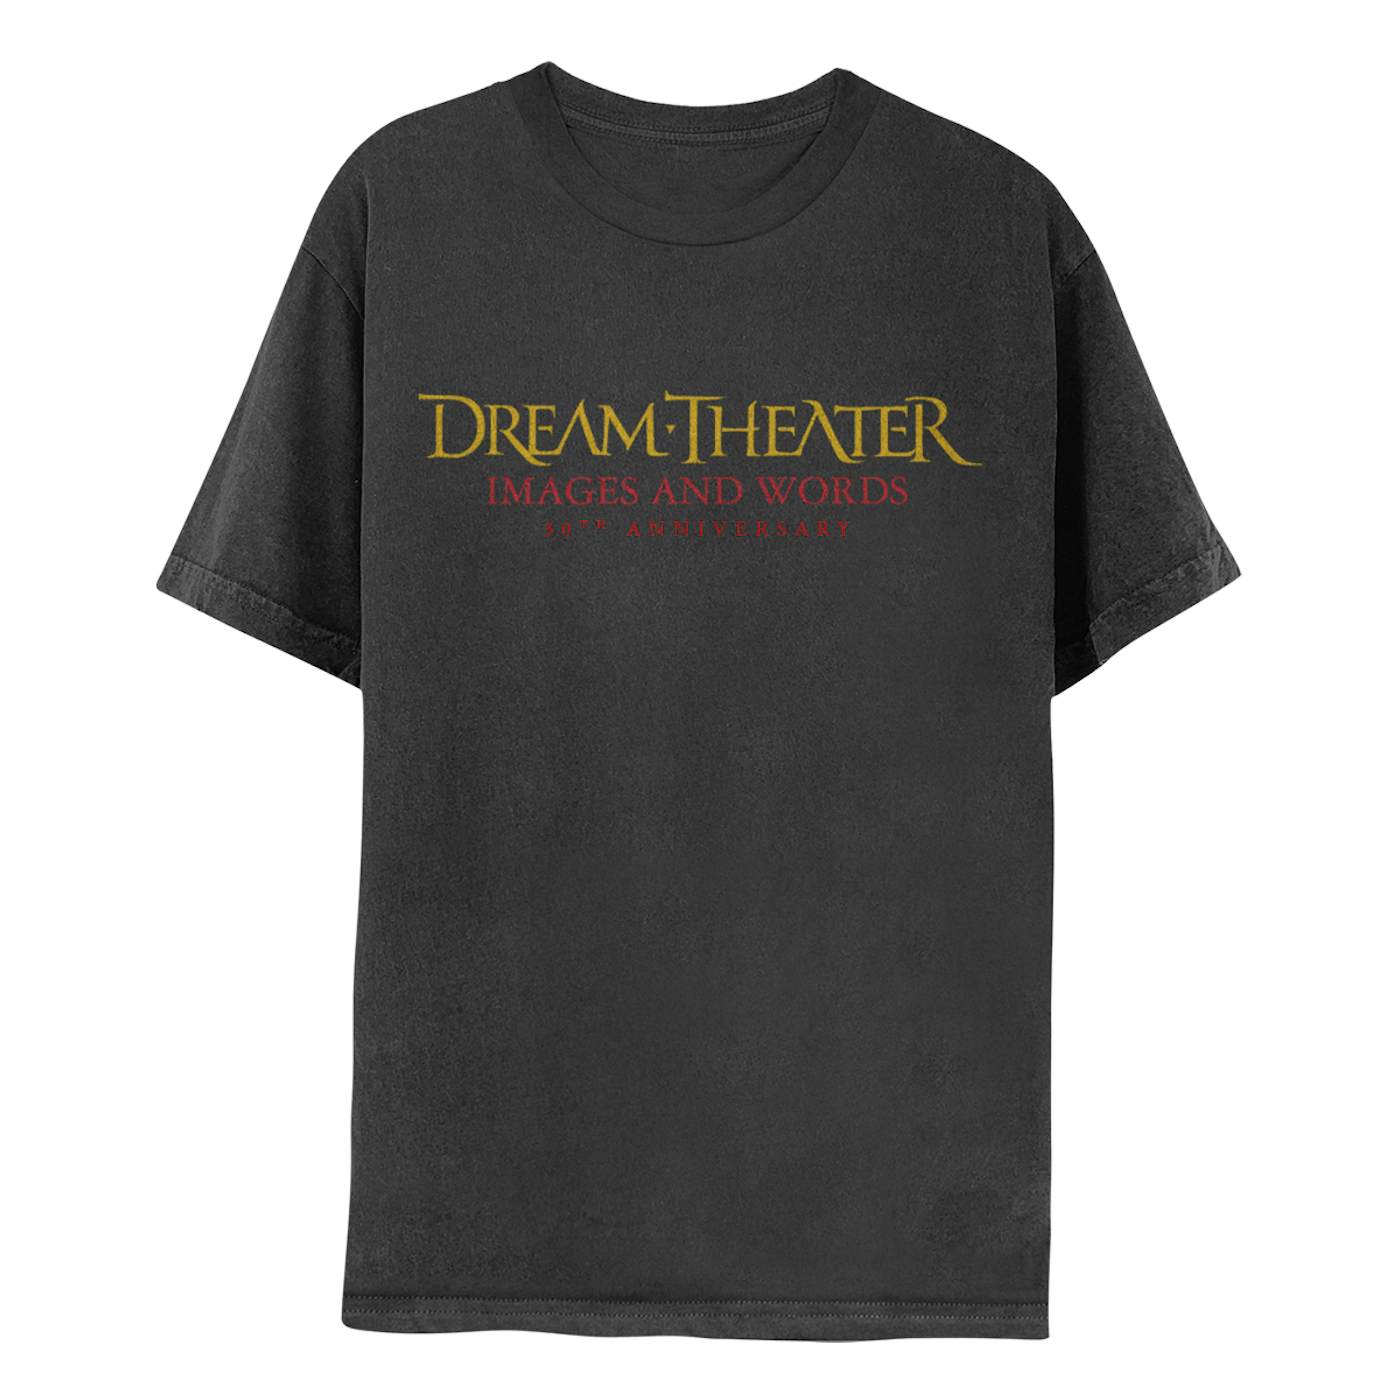 Dream Theater Images and Words 30th Anniversary Logo Tee